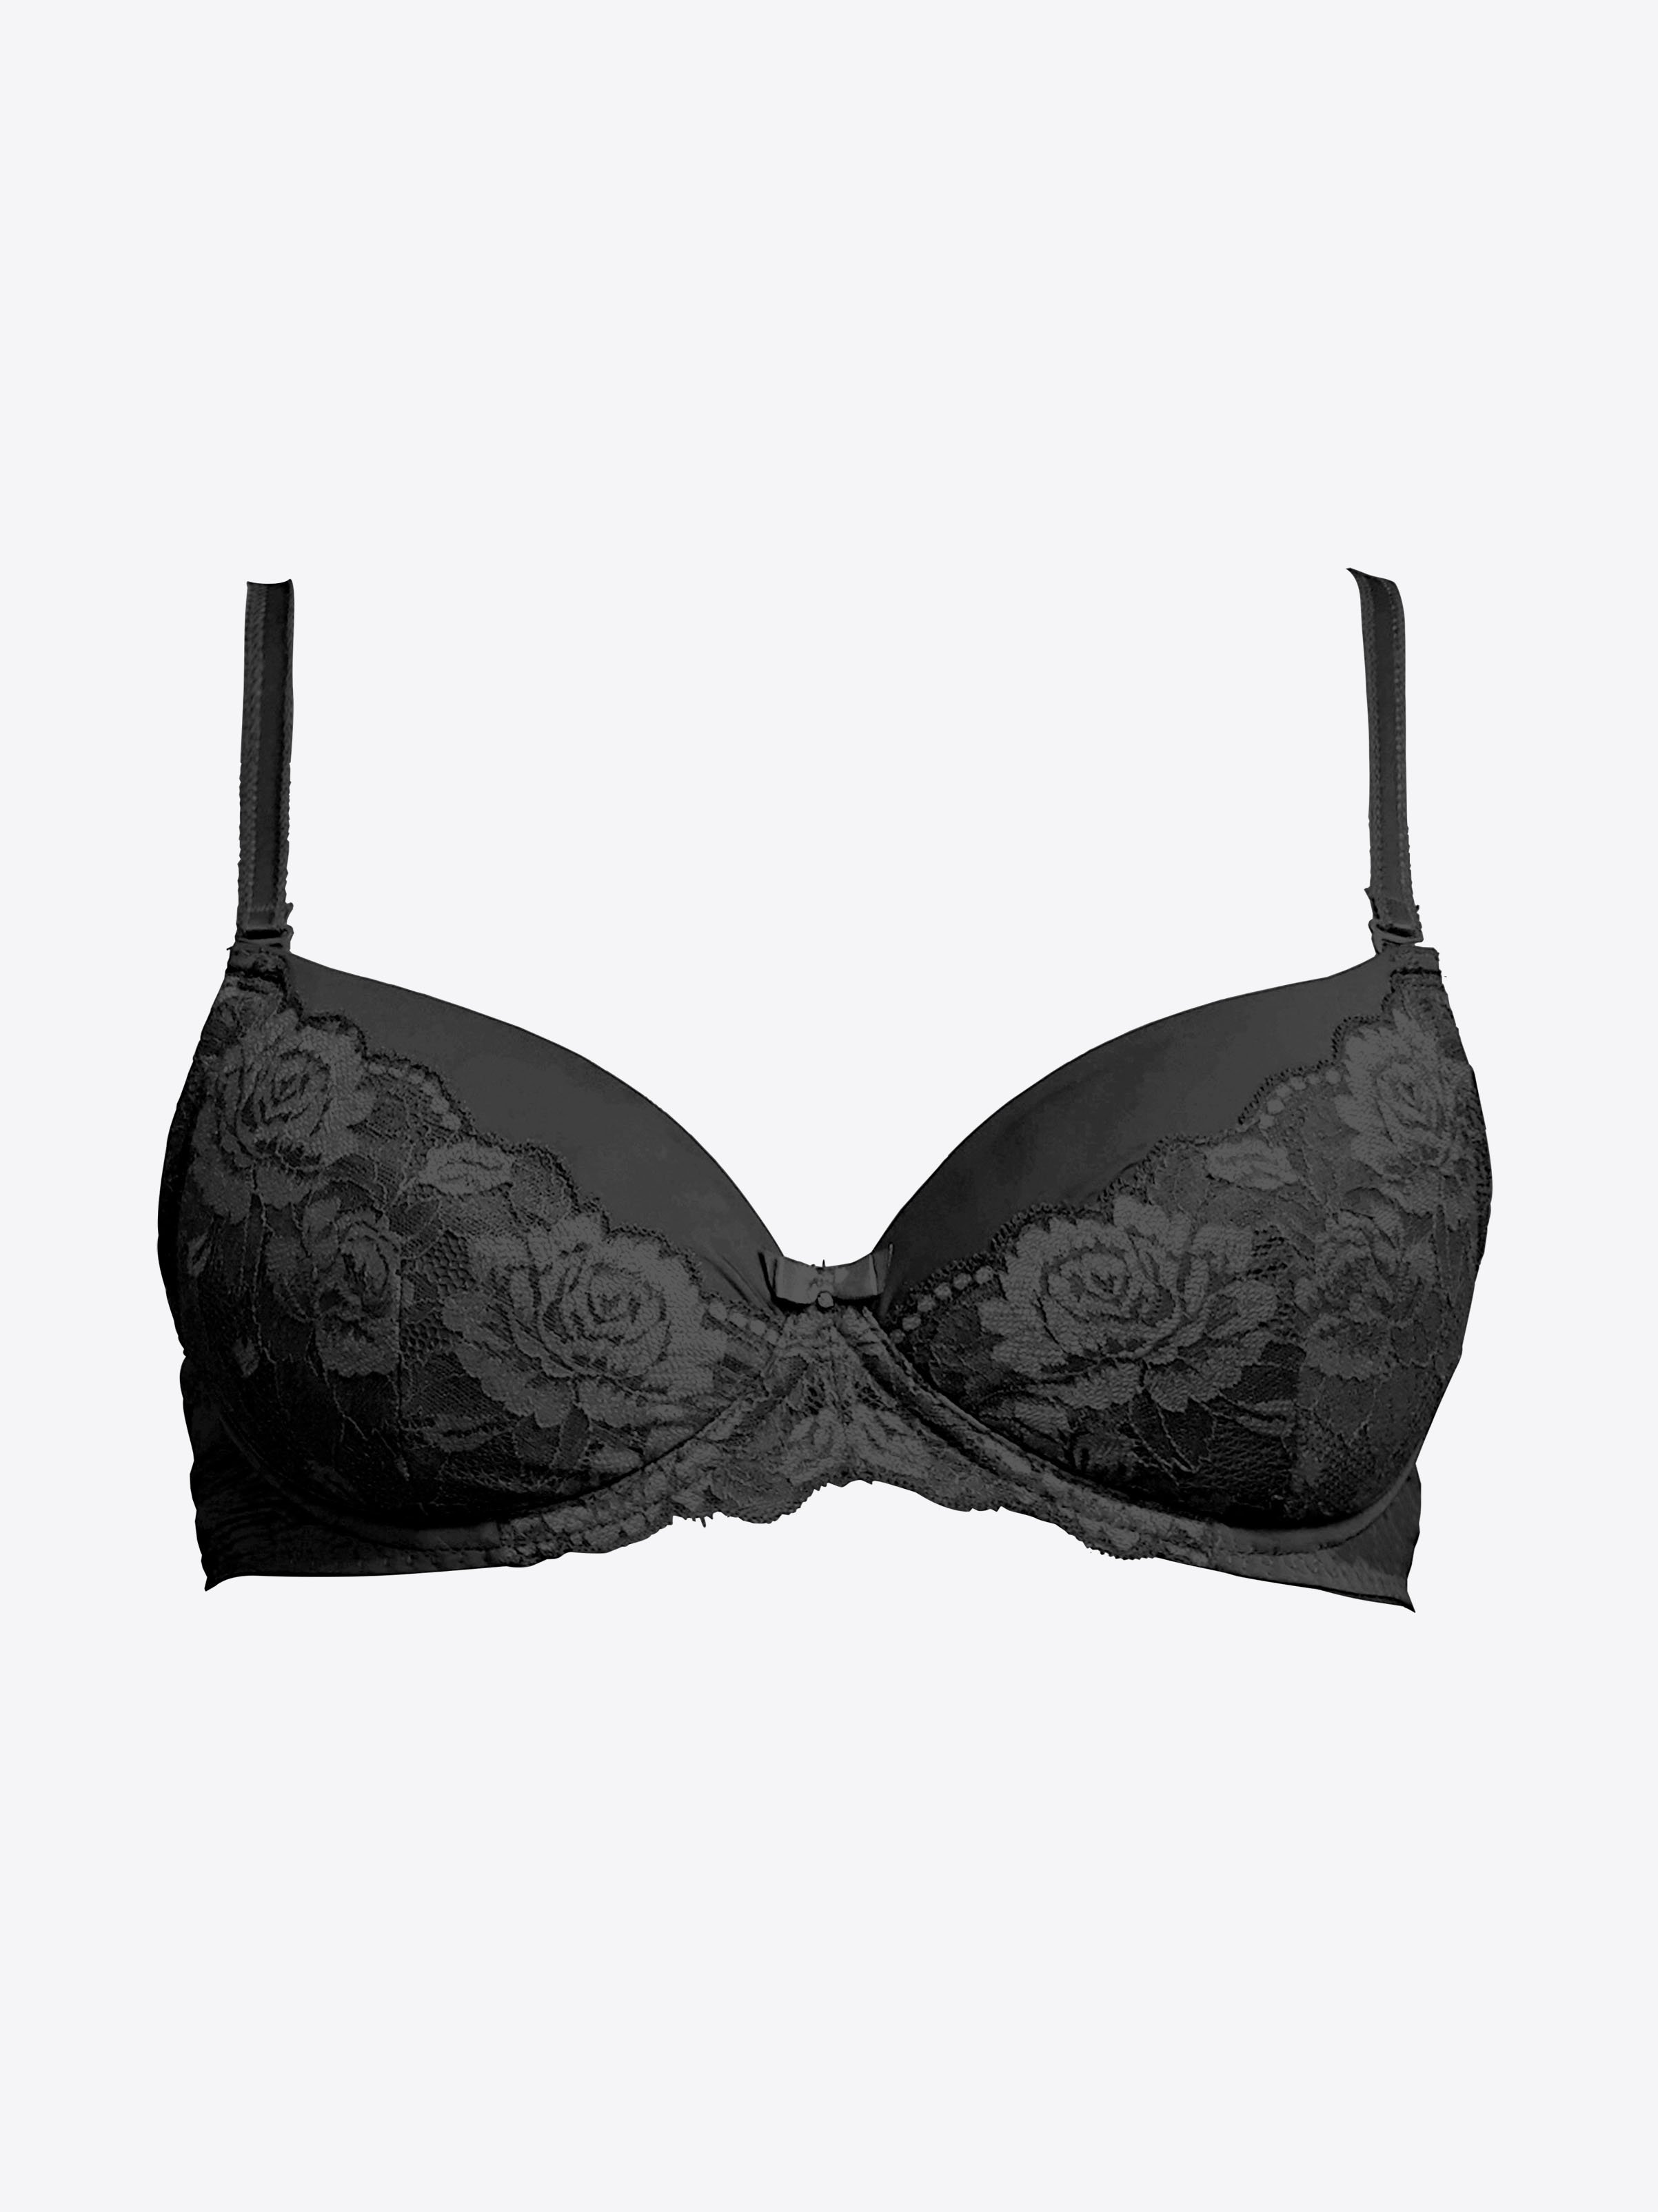 Penningtons.com: ATTN bra lovers: this is your last chance ⌛